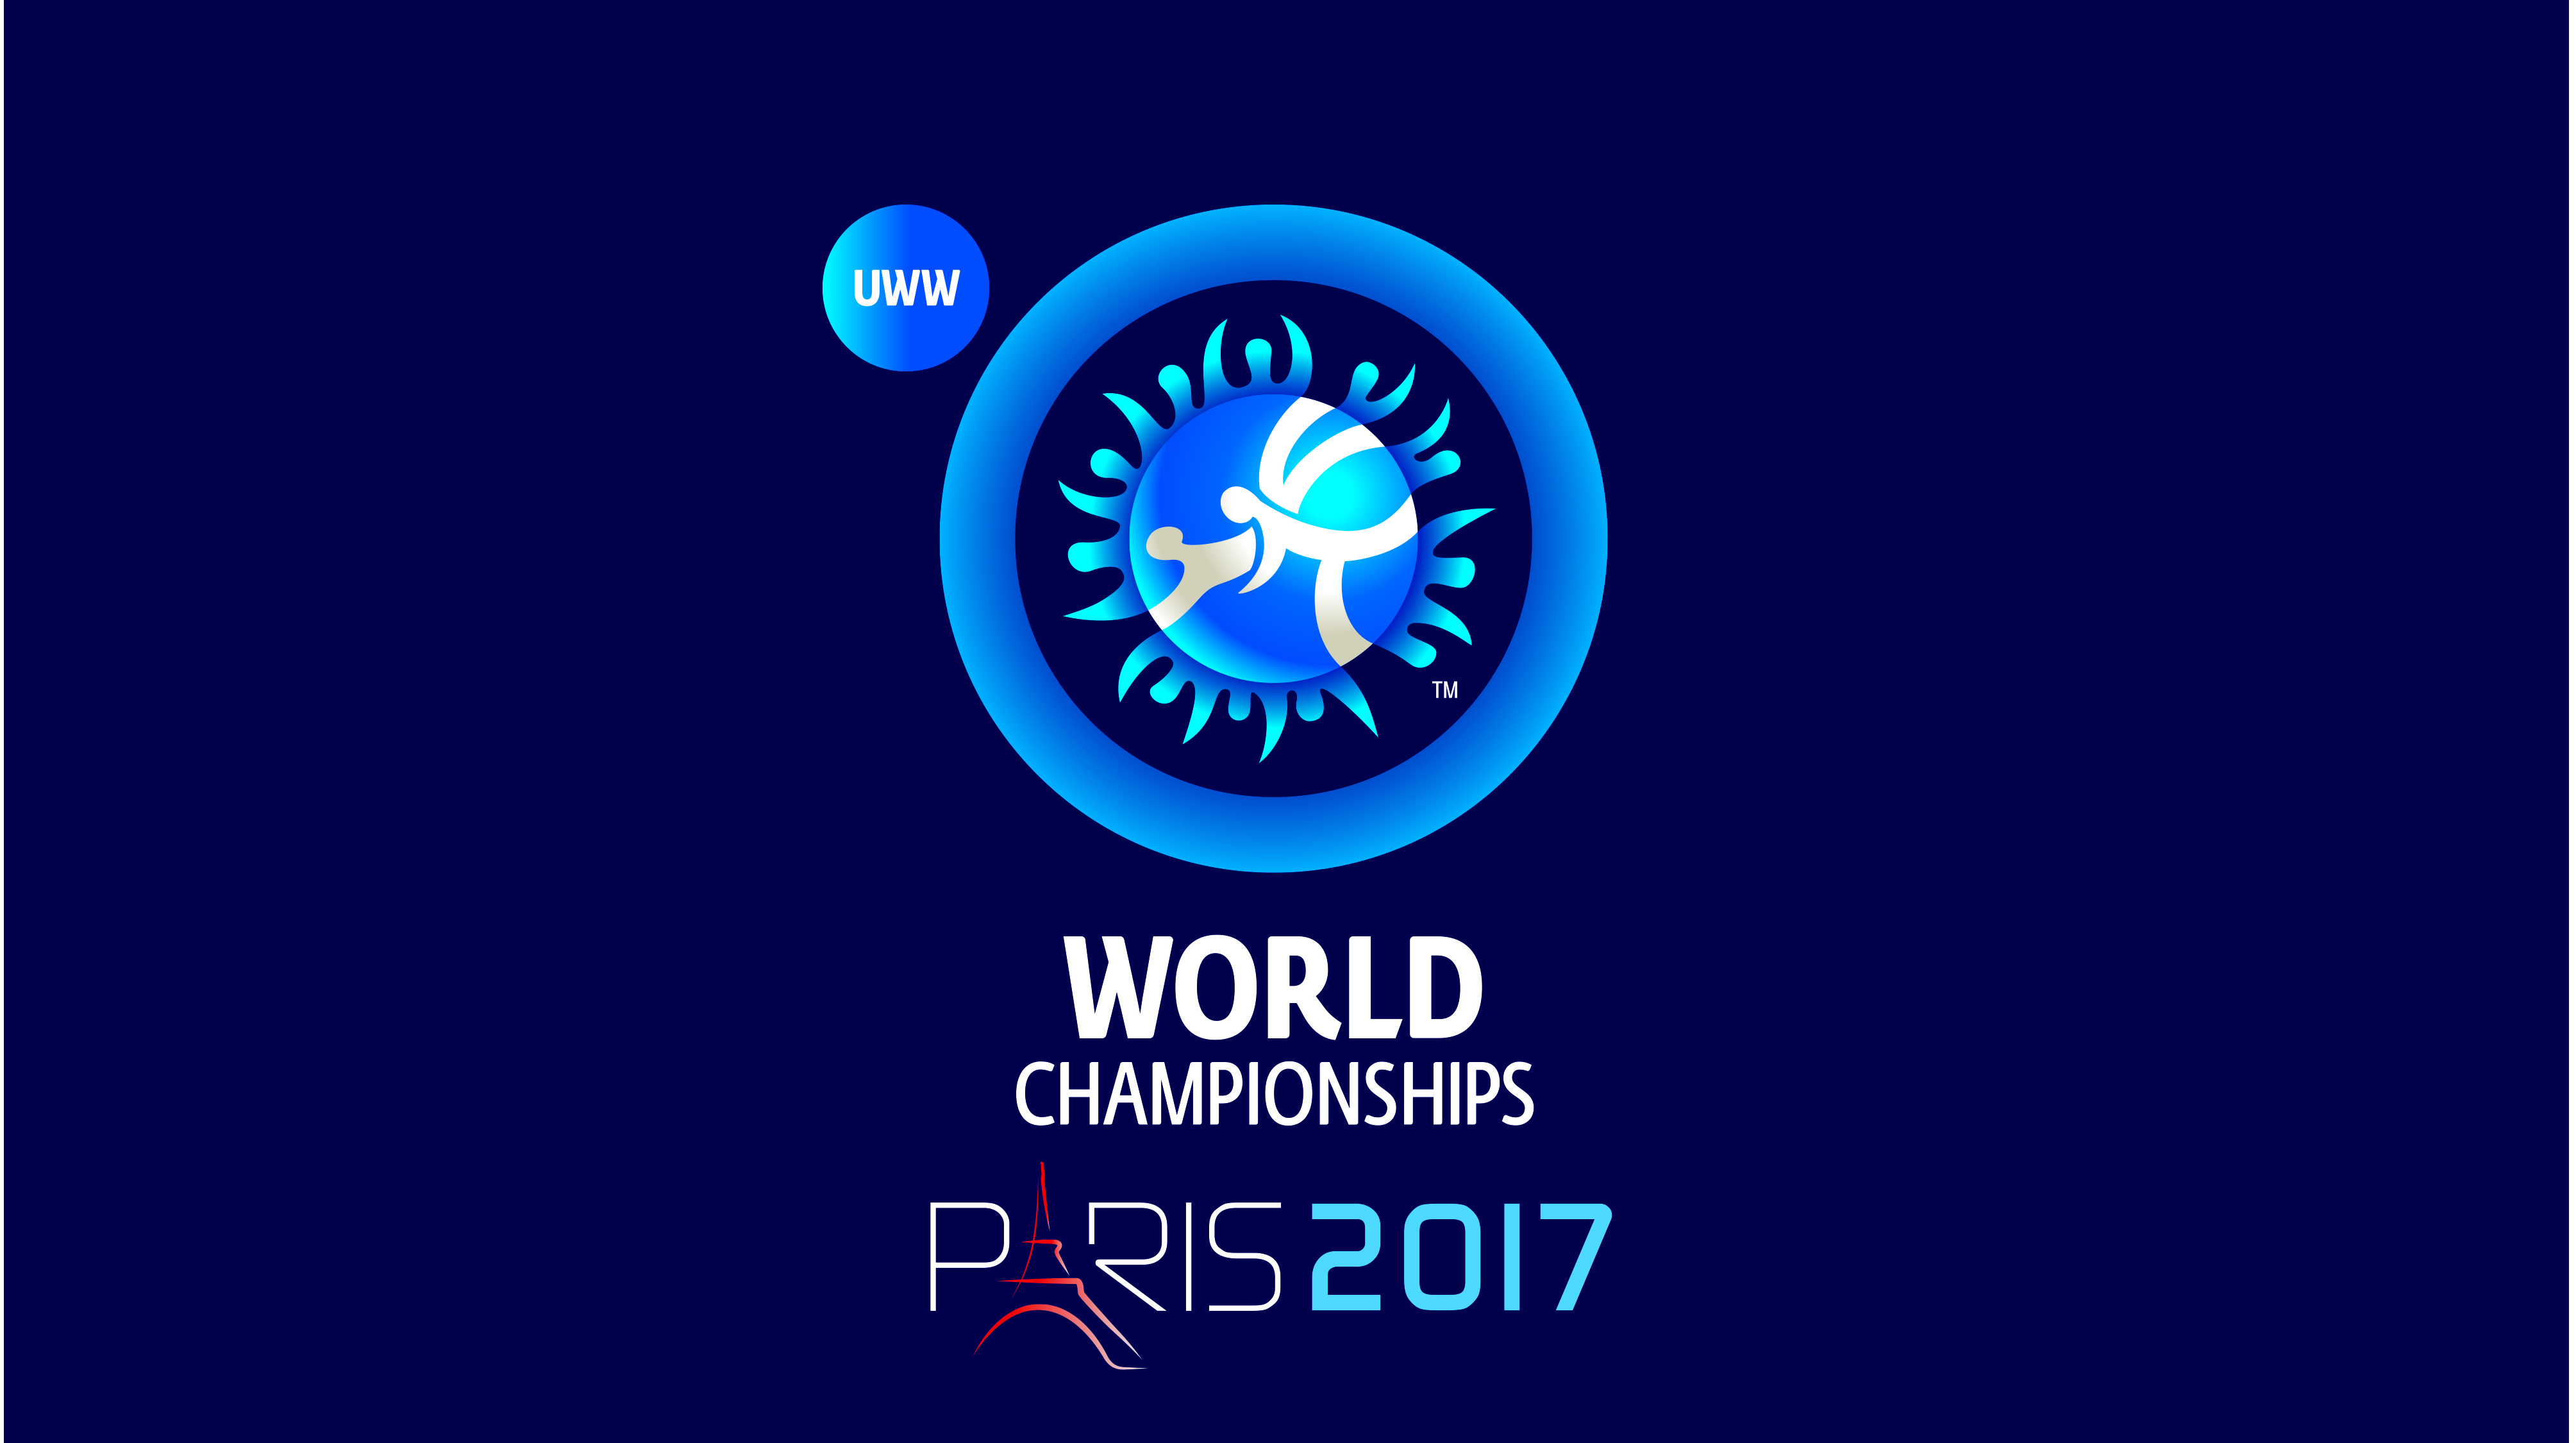 World Wrestling Championship | Bajrang Punia loses, India end campaign without a medal